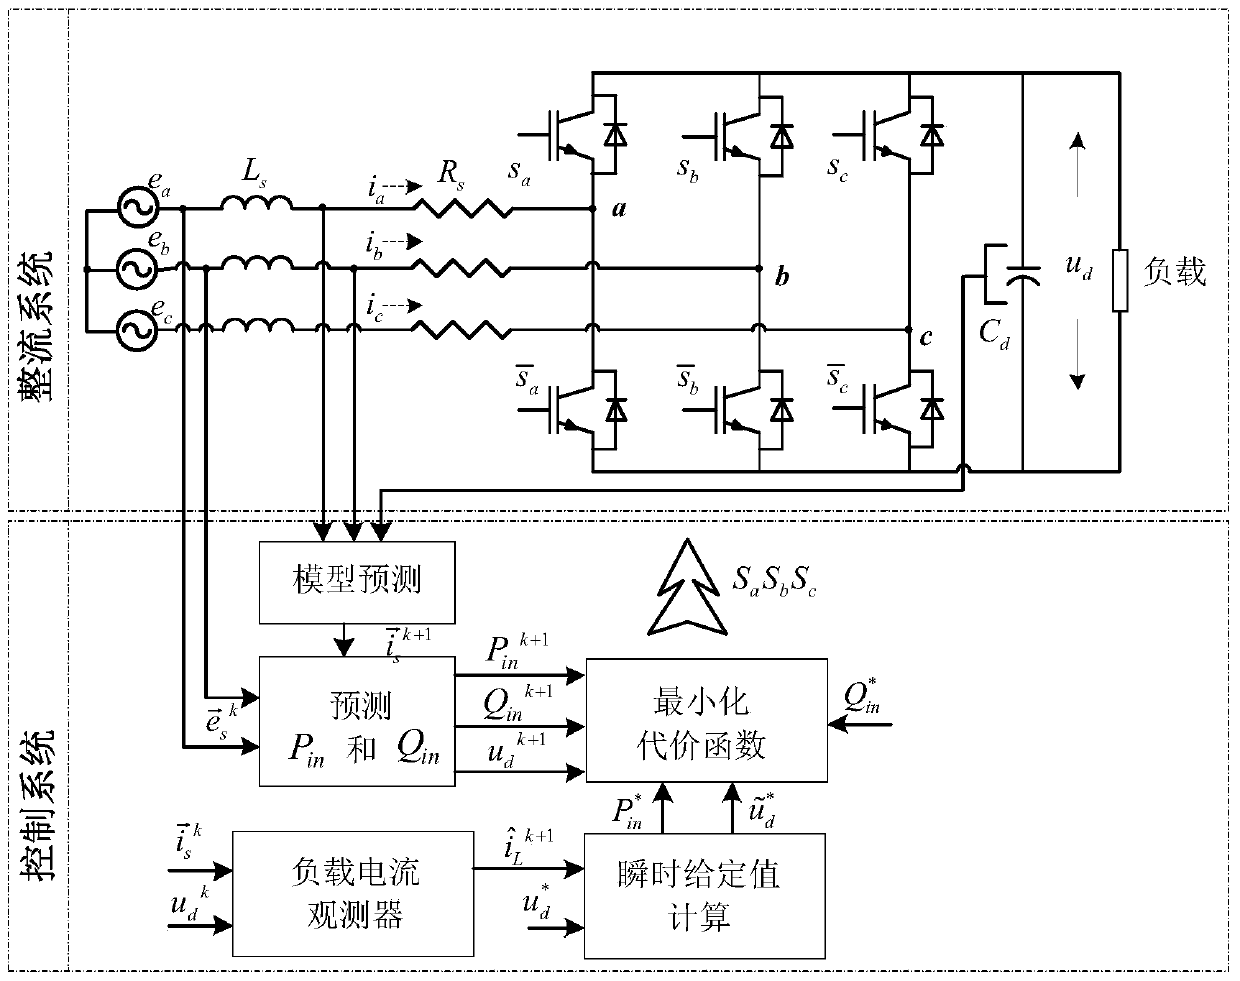 Direct power predictive control method based on load current observation of three-phase six-switch rectifier